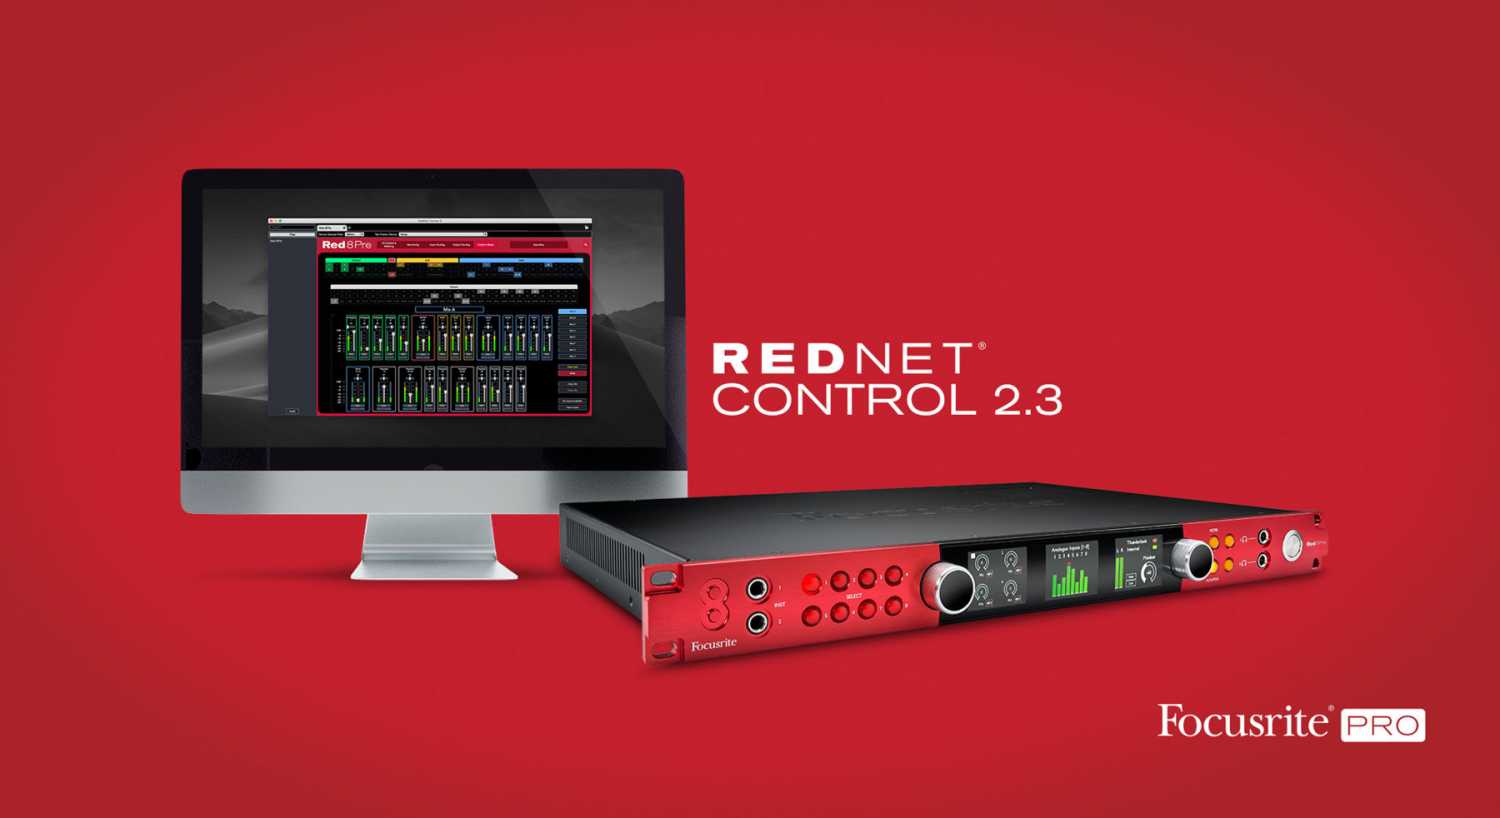 RedNet Control 2.3 is available now for free download